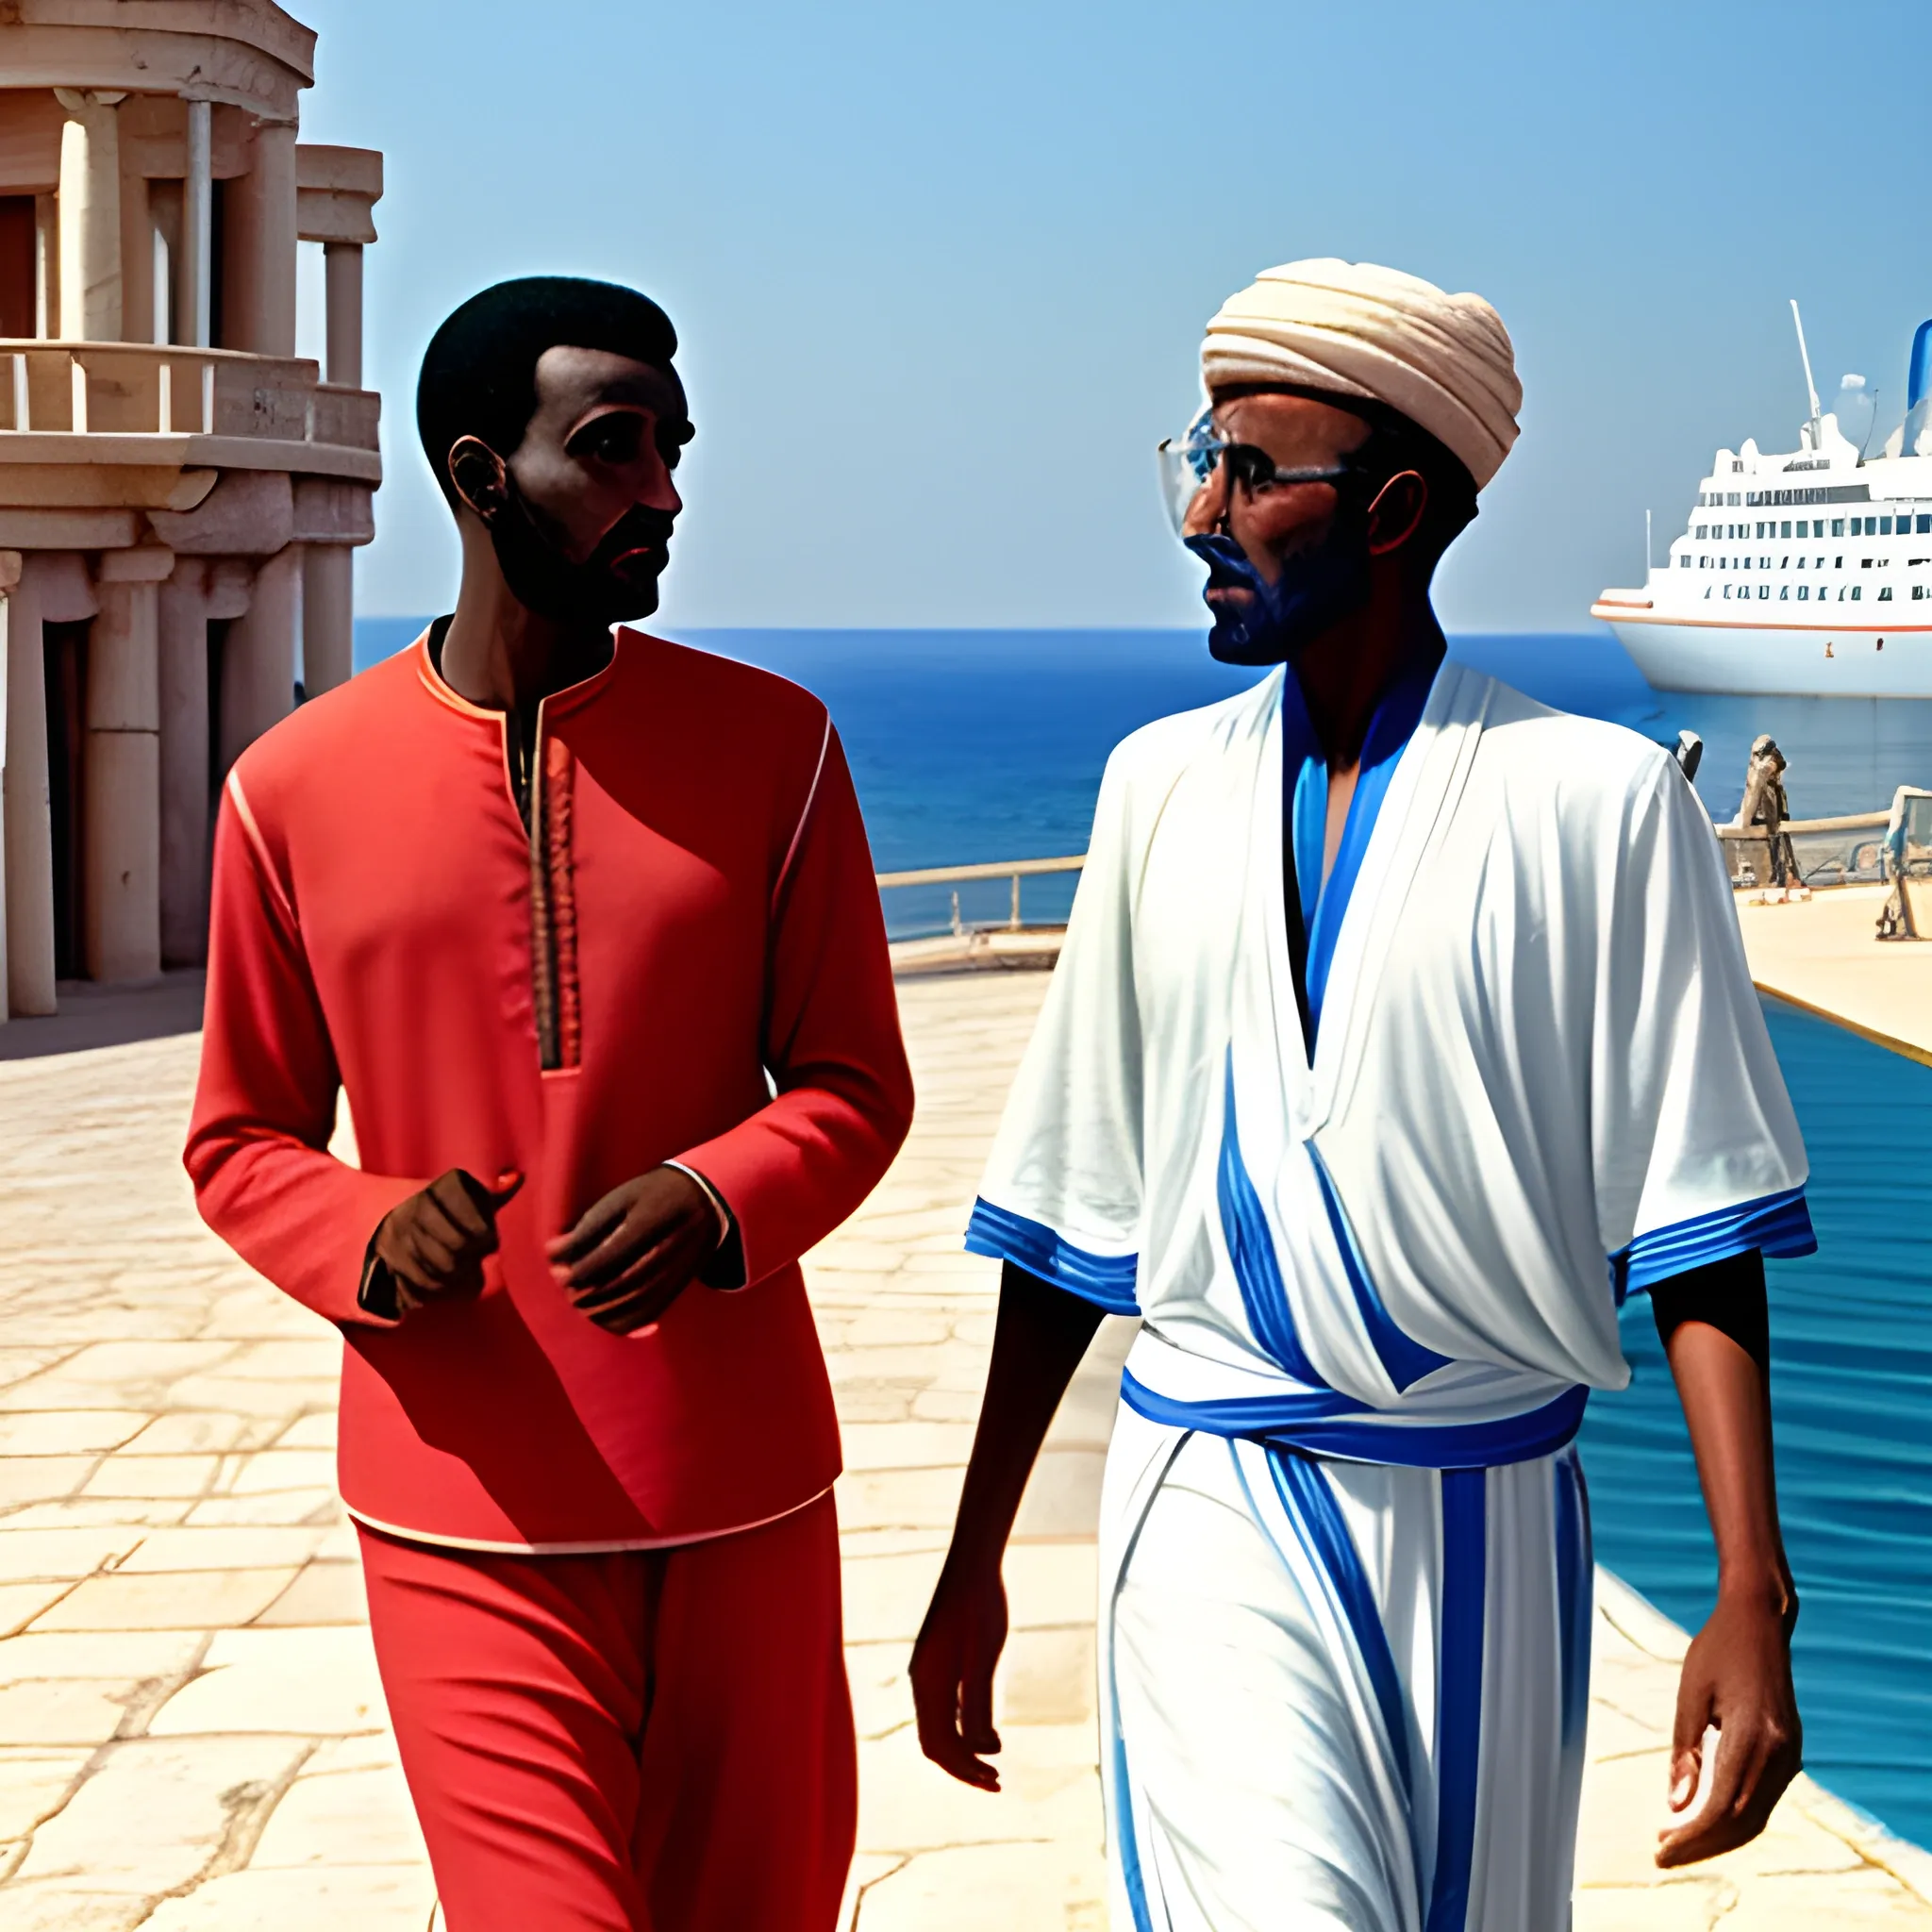 1960's Somalian man speaking to another man, wearing a clothes that are a mix of greek and Somalian clothing, walking on the broadwalk of a Somalian port city, by the ocean, ships in the dstance, with greek architecture, drawn in Jean Giraud's art style, close side view